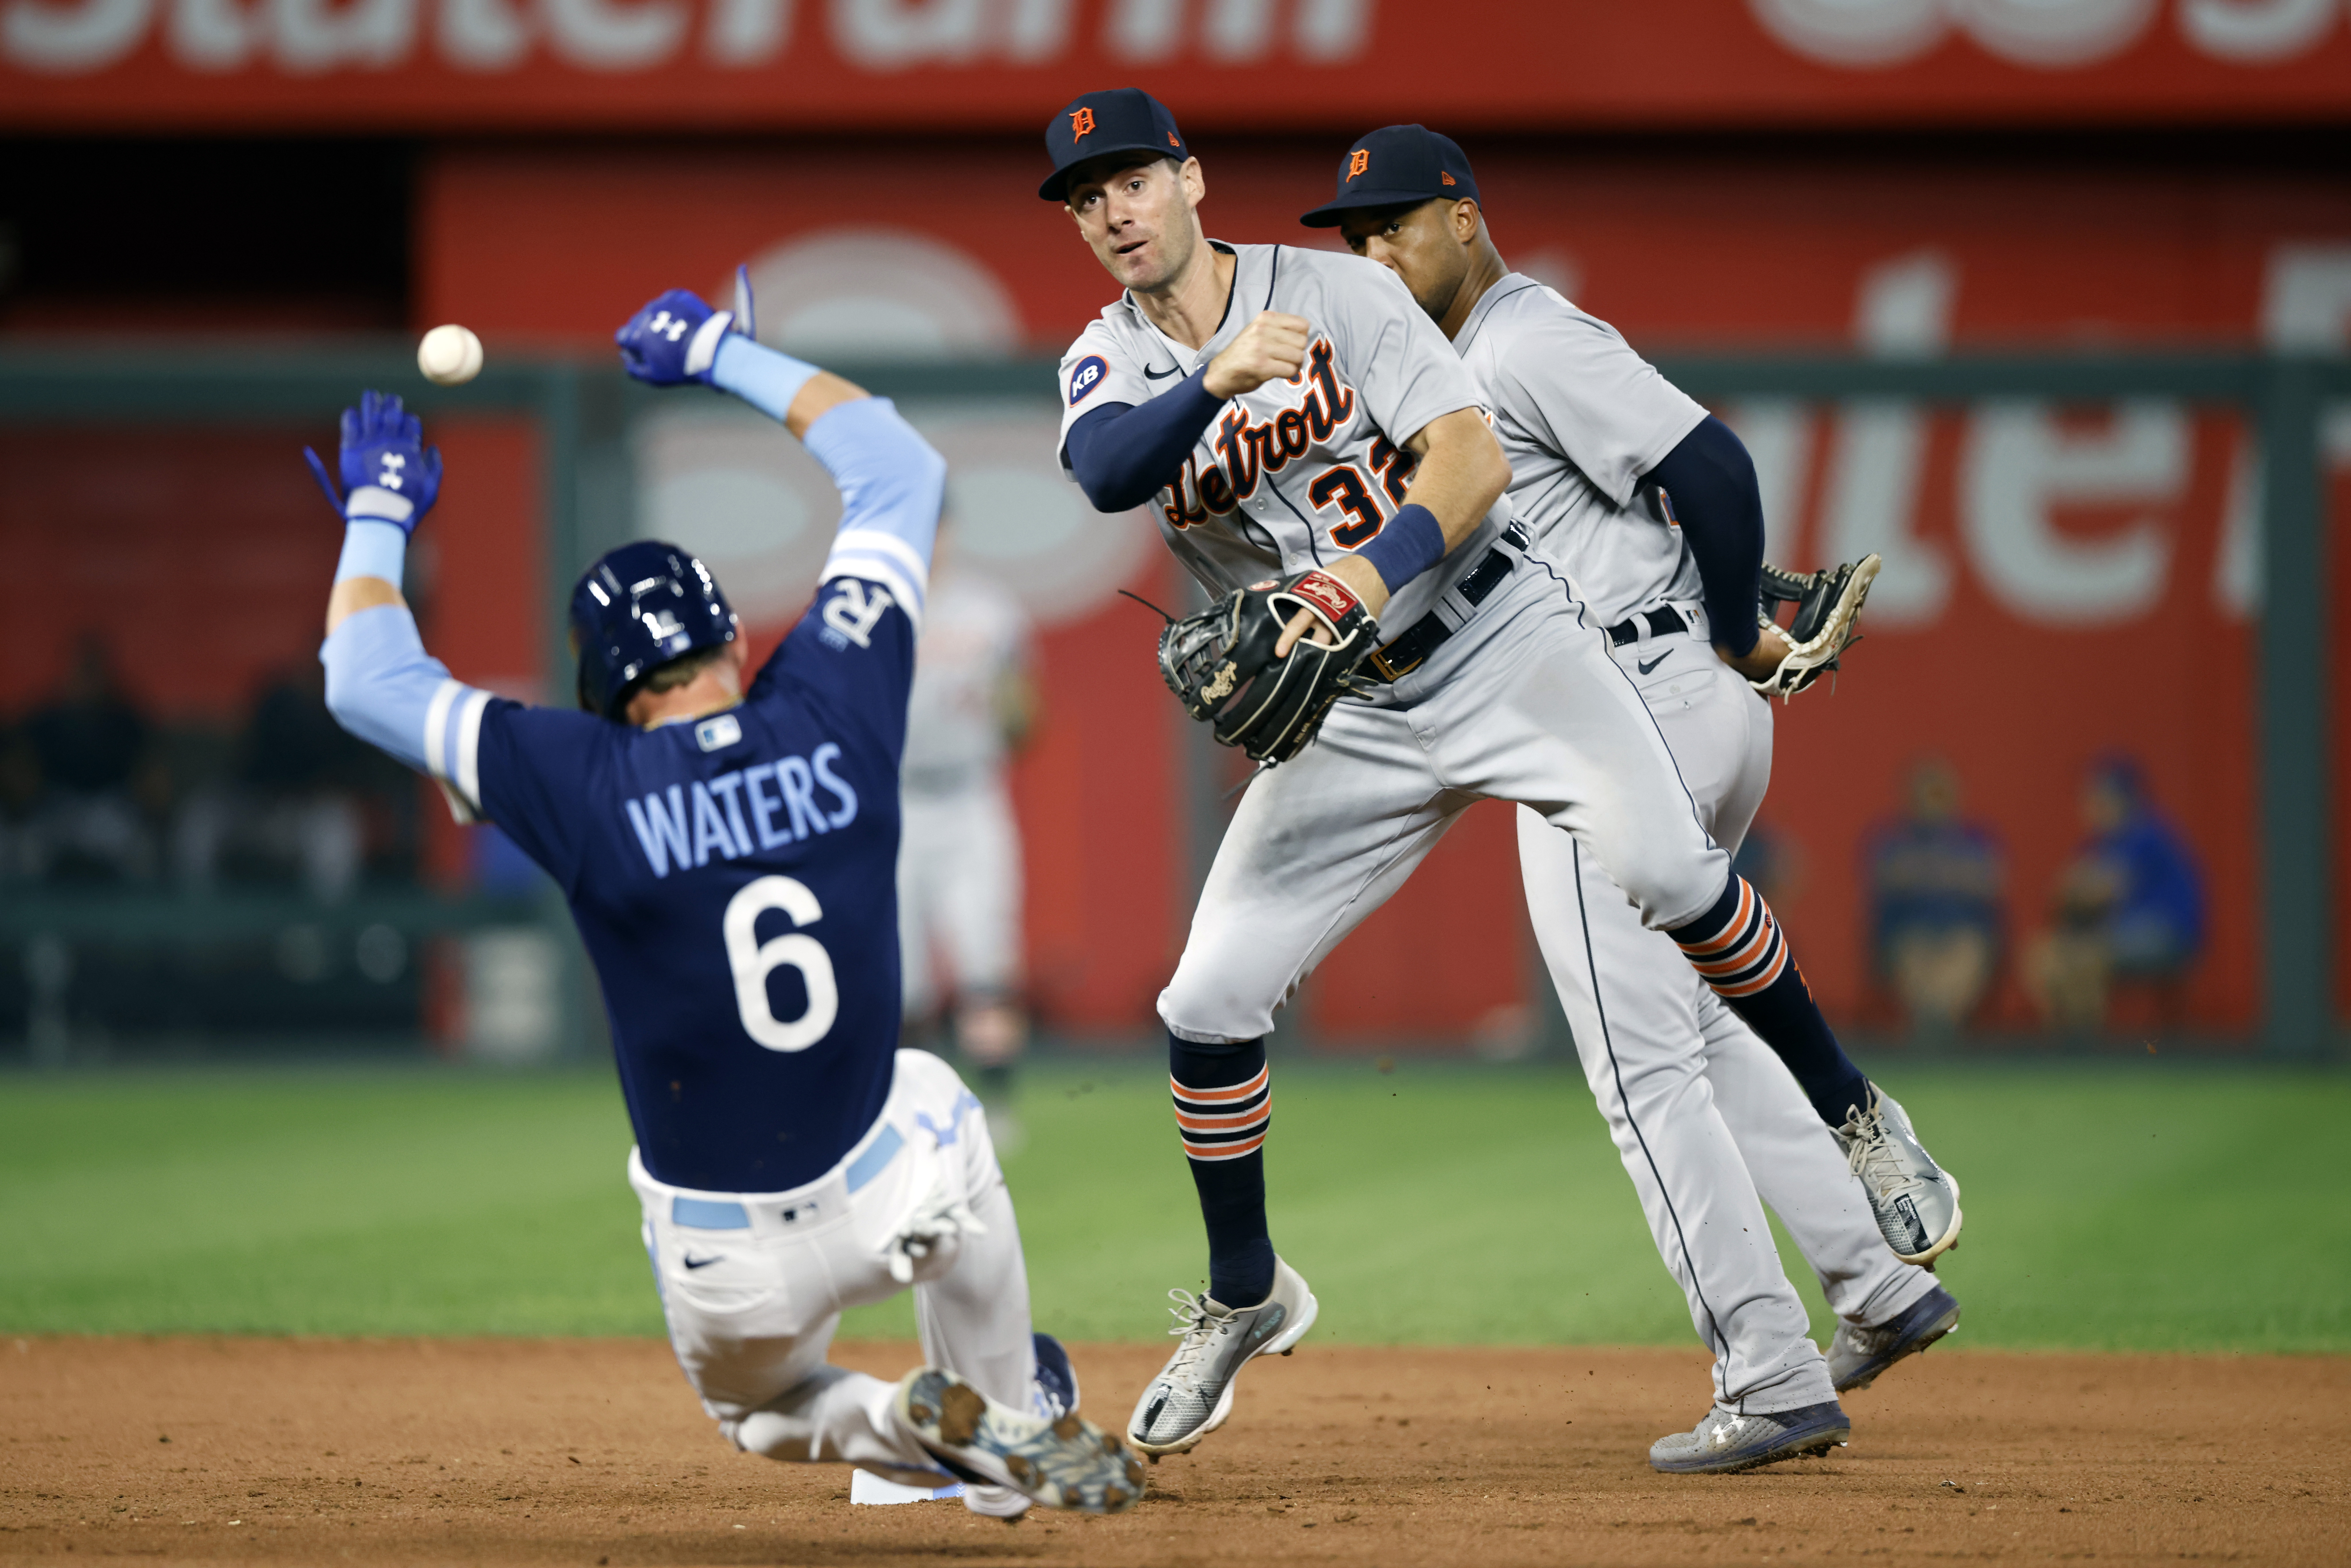 Detroit Tigers puzzled by Kansas City Royals, 3-1: Game thread replay